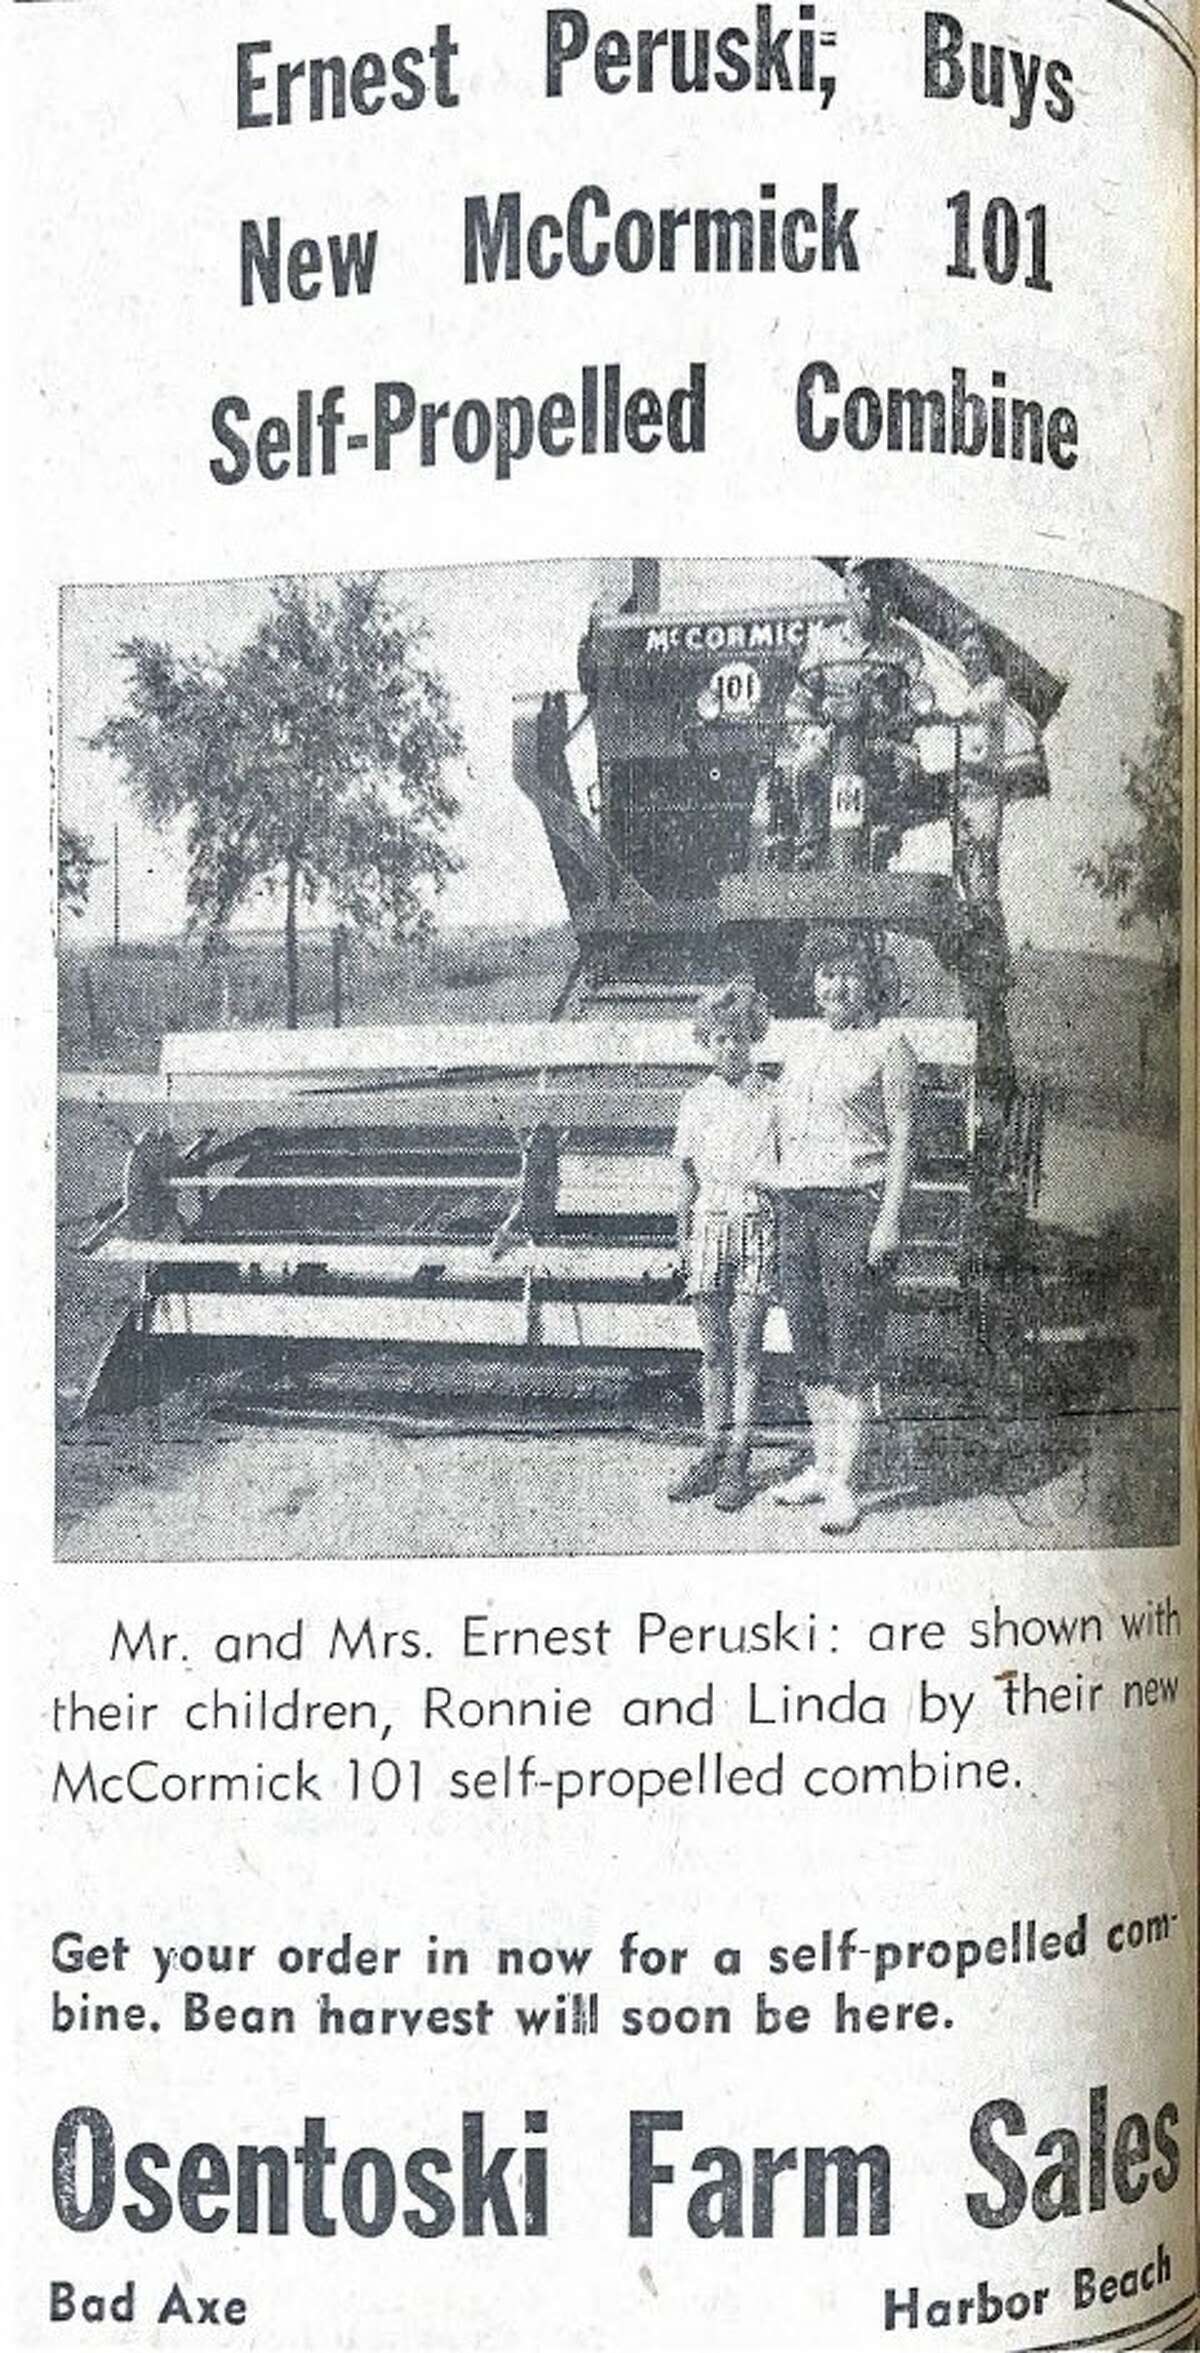 For this week's Tribune Throwback we take a look in the archives from the month of August 1960.